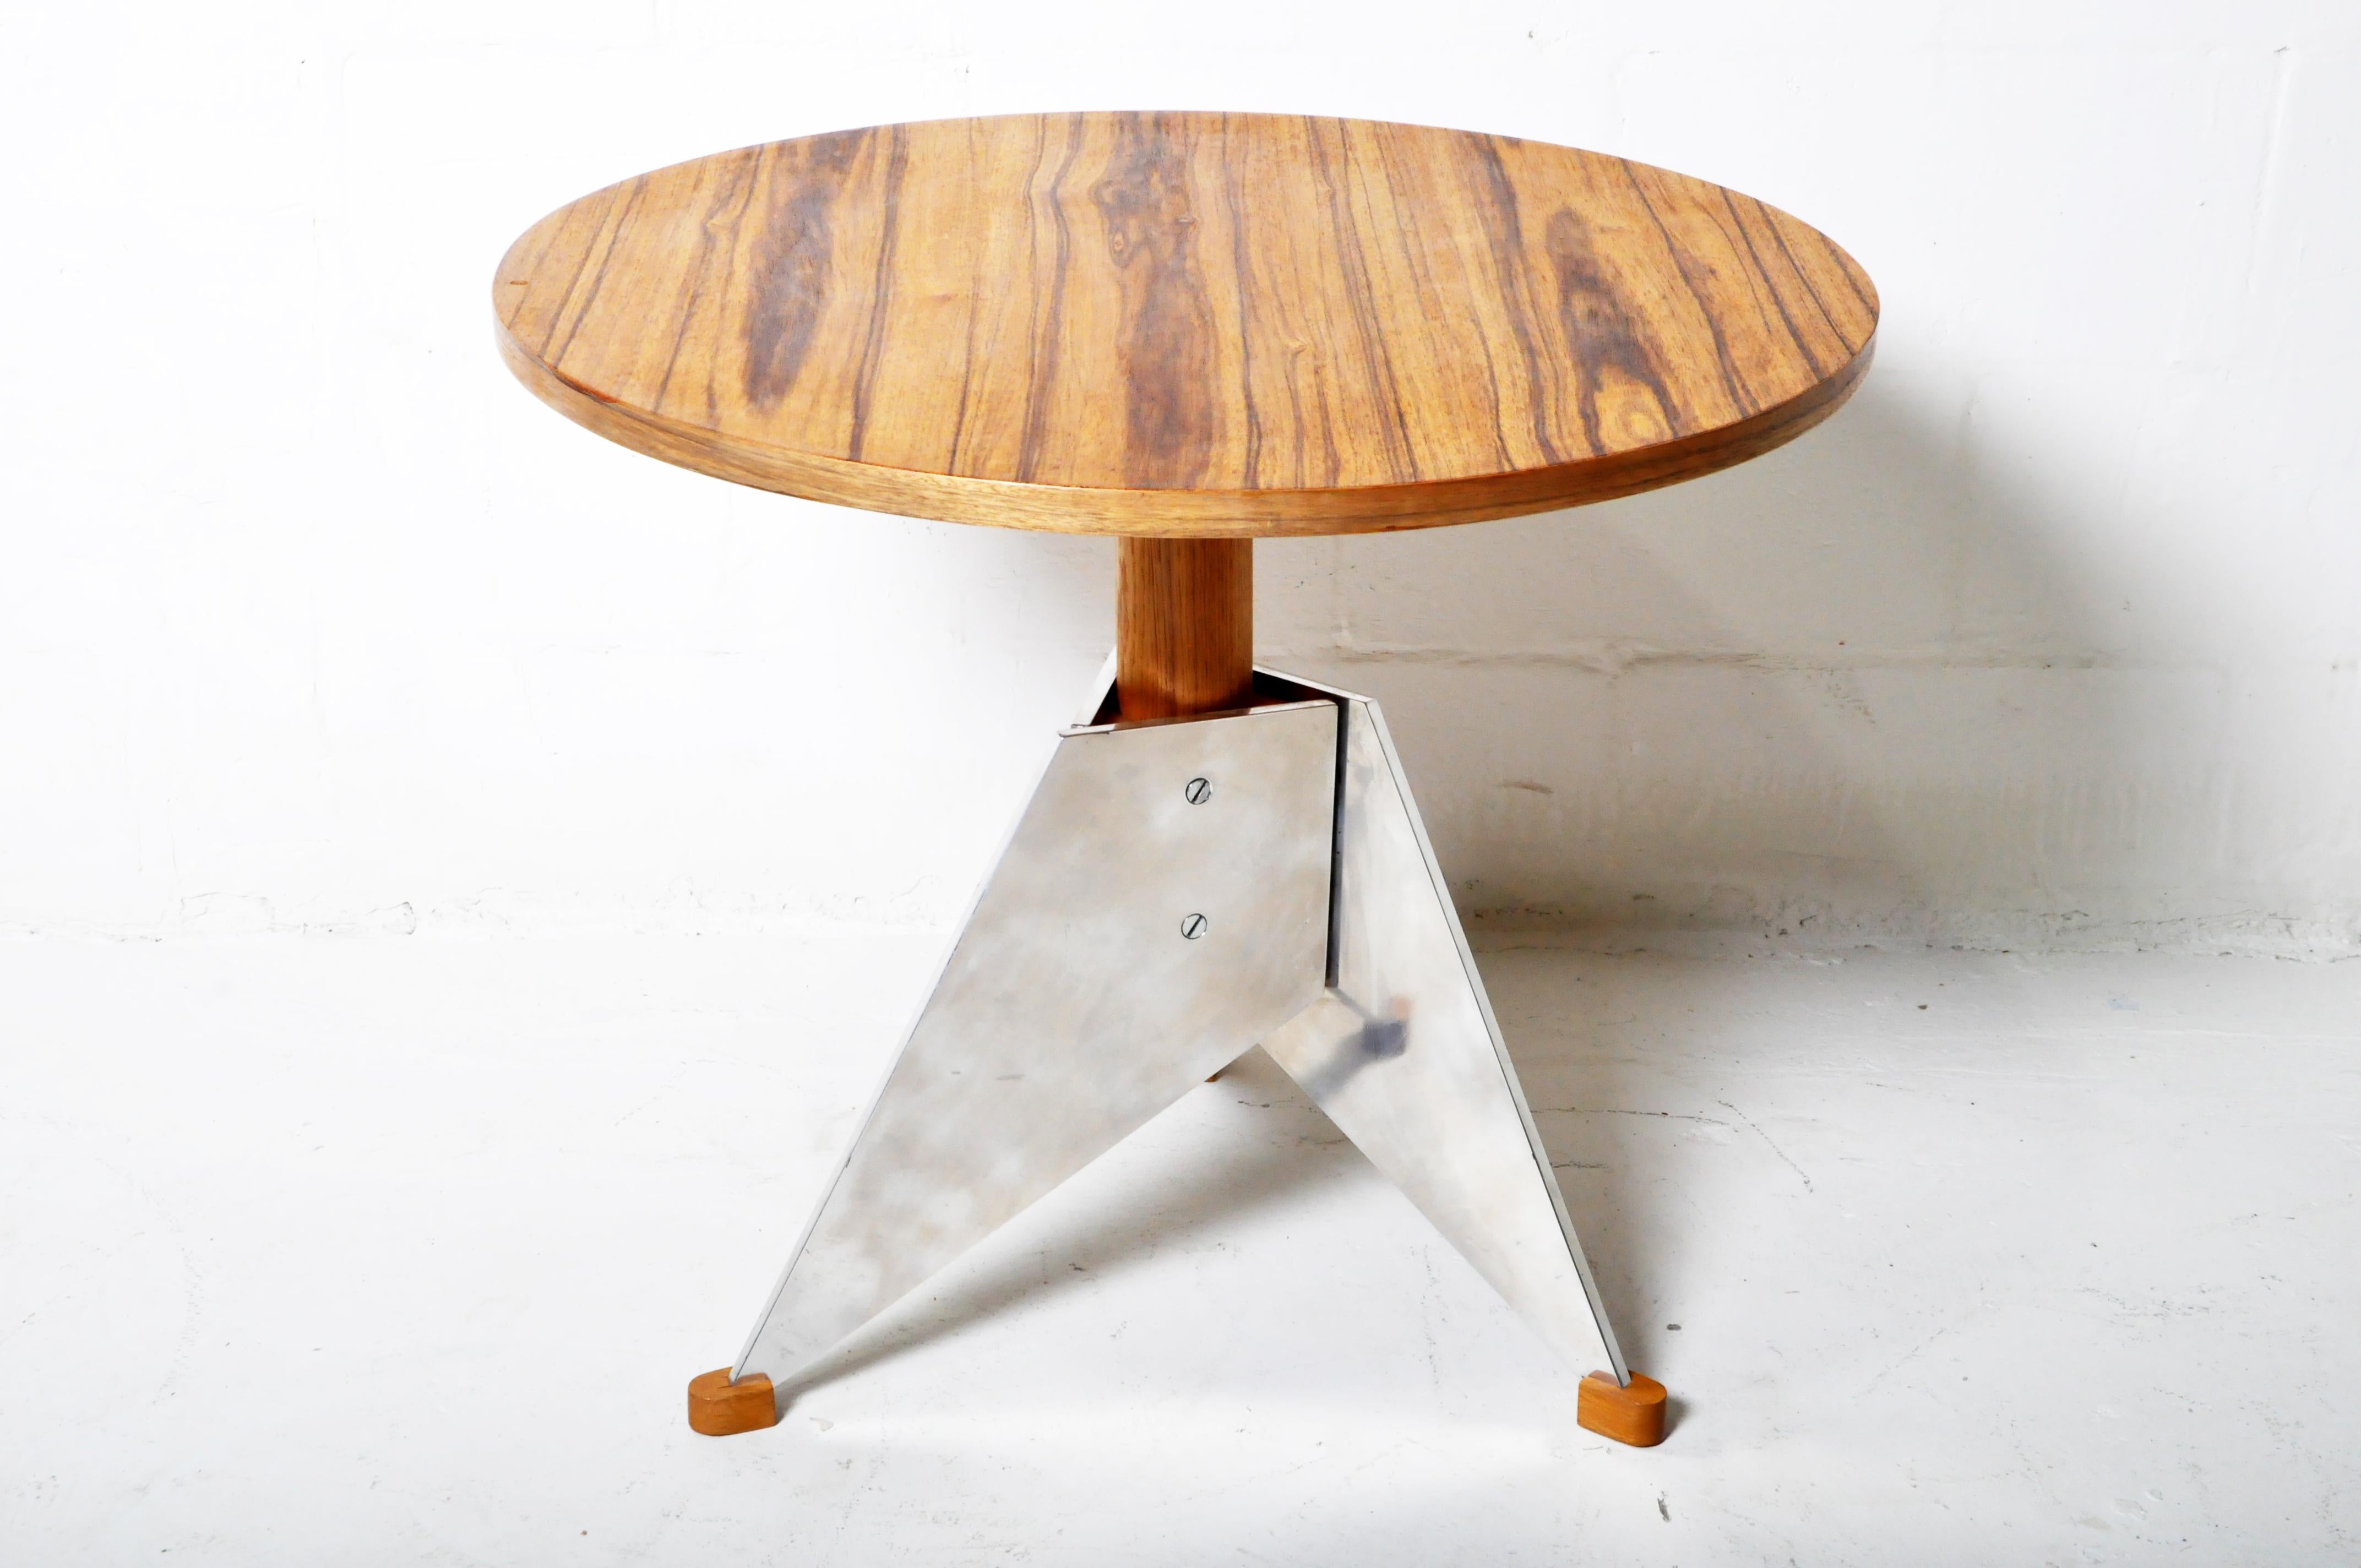 This light walnut veneer round table features an angular chromed steel base. The table is an example of brutalist 